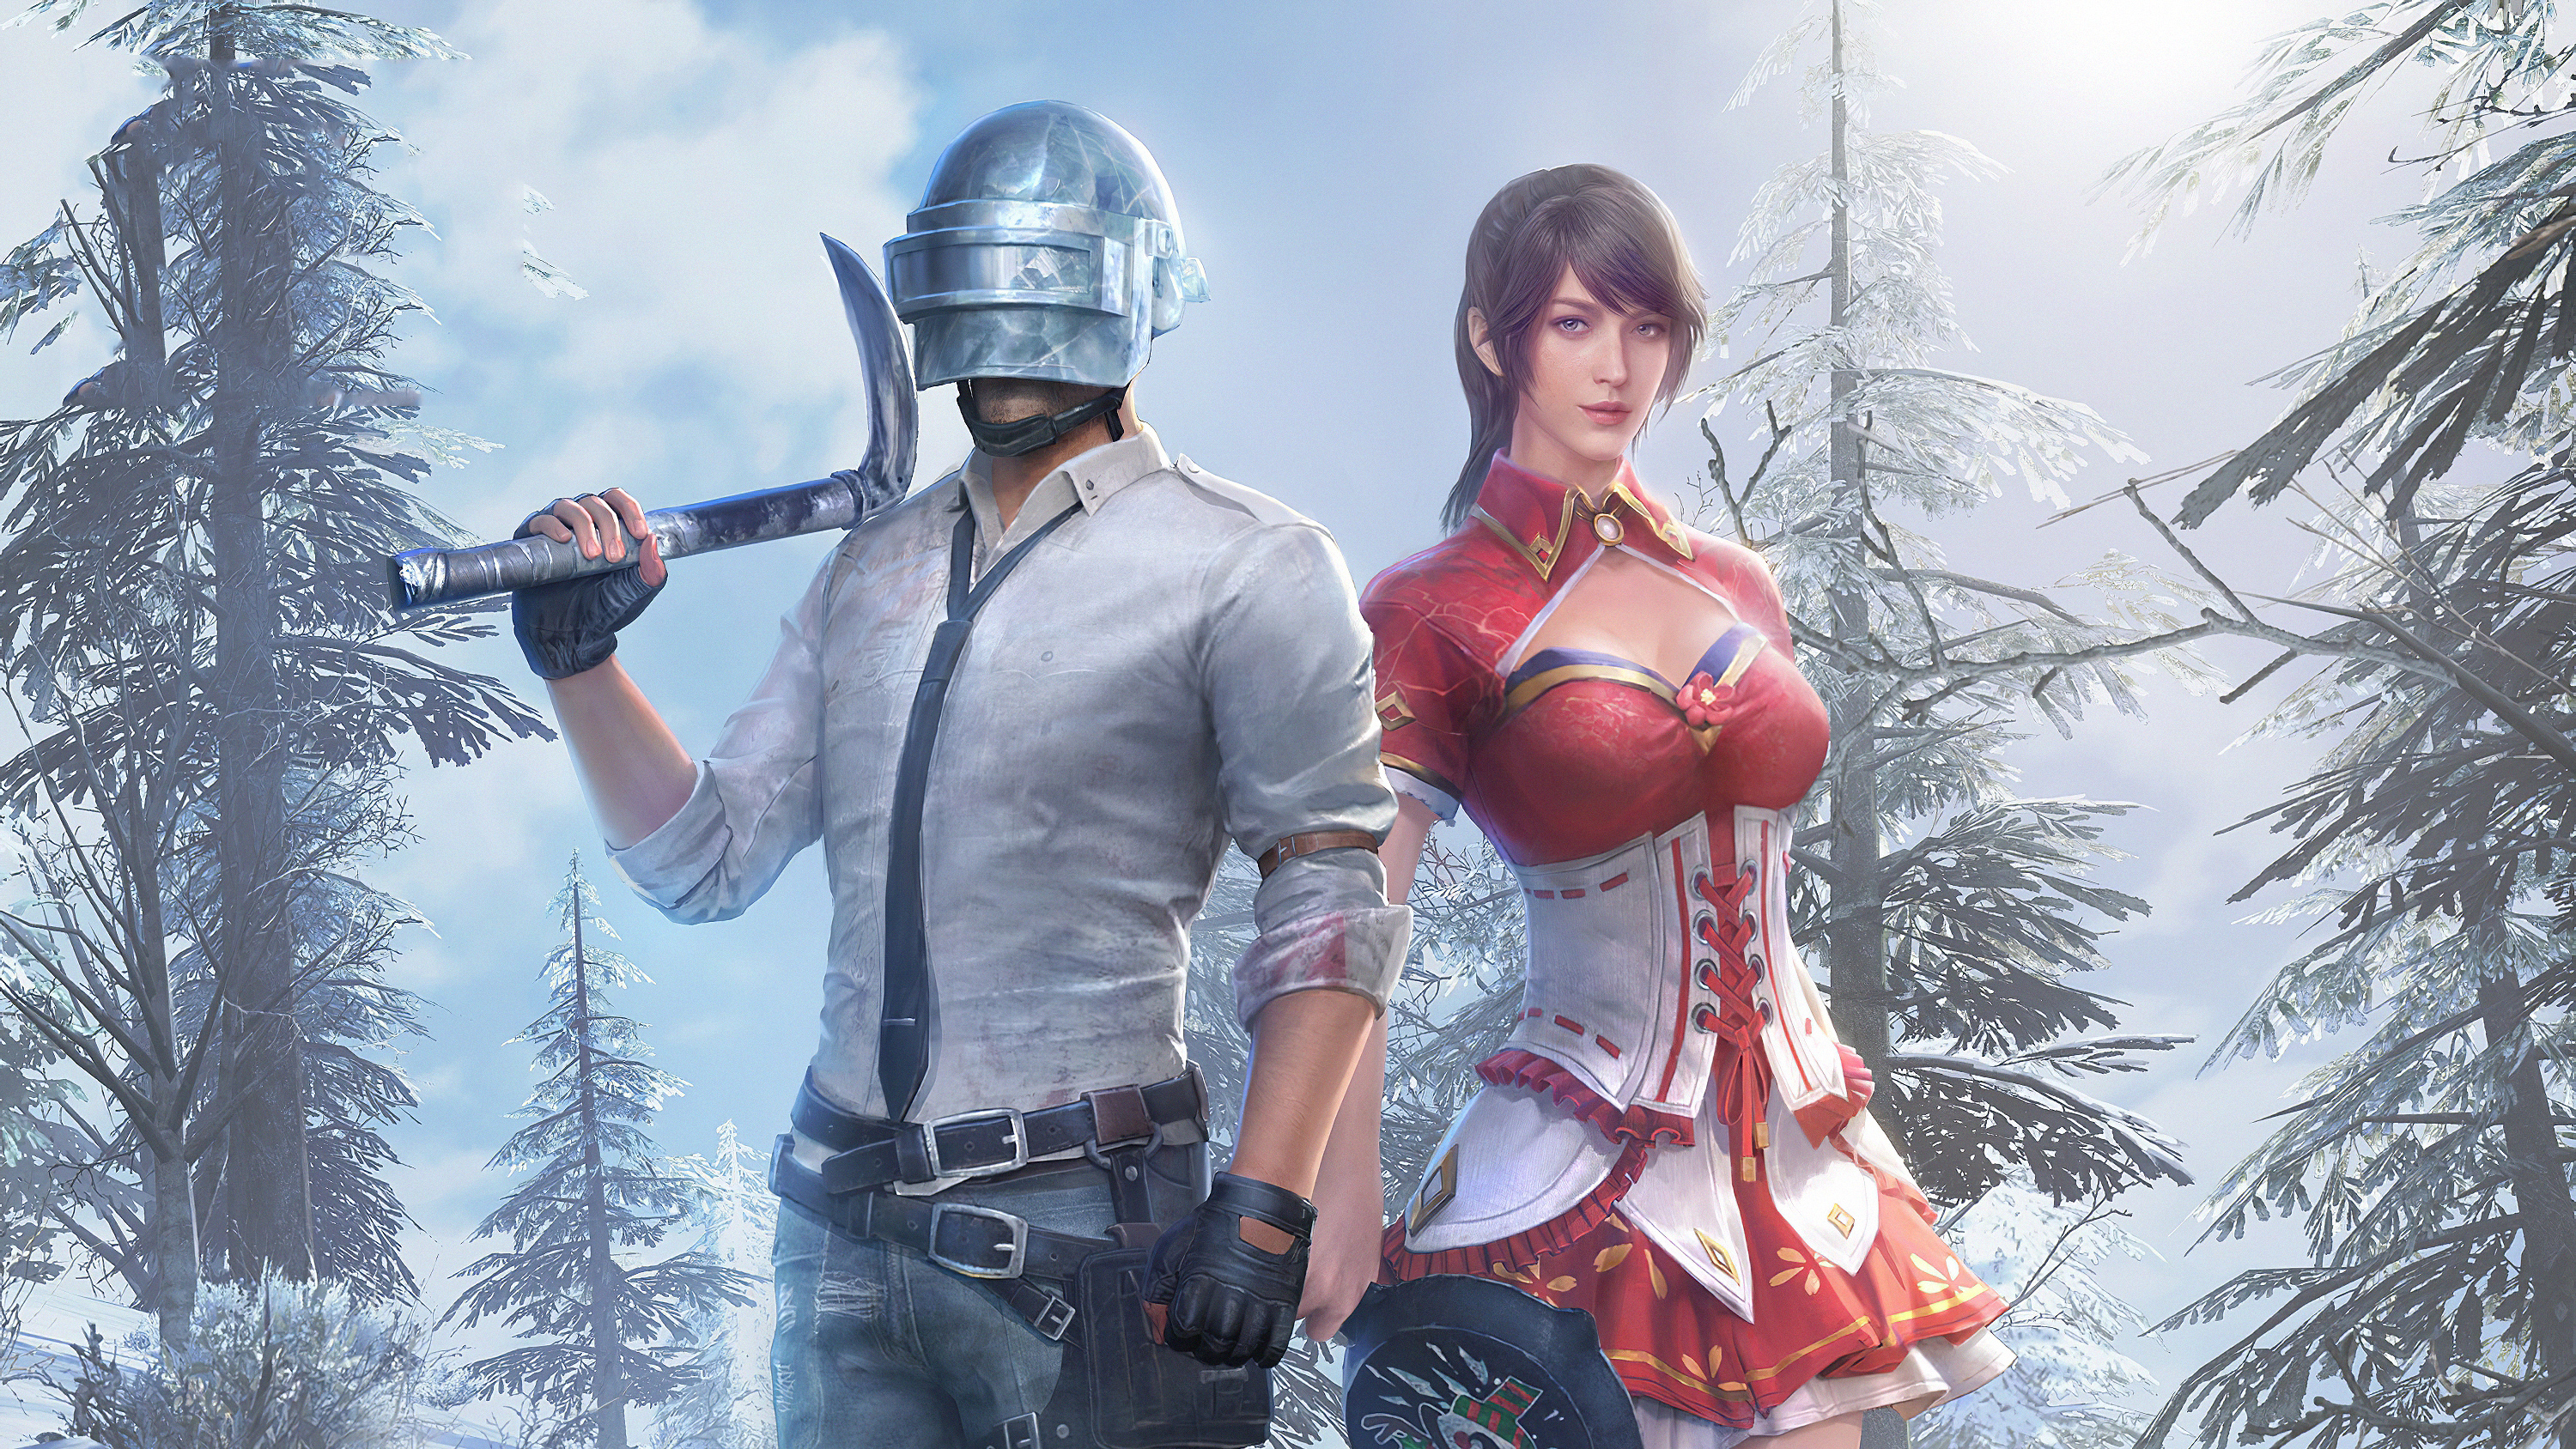 Pubg Helmet Guy With Girl, HD Games, 4k Wallpapers, Images, Backgrounds